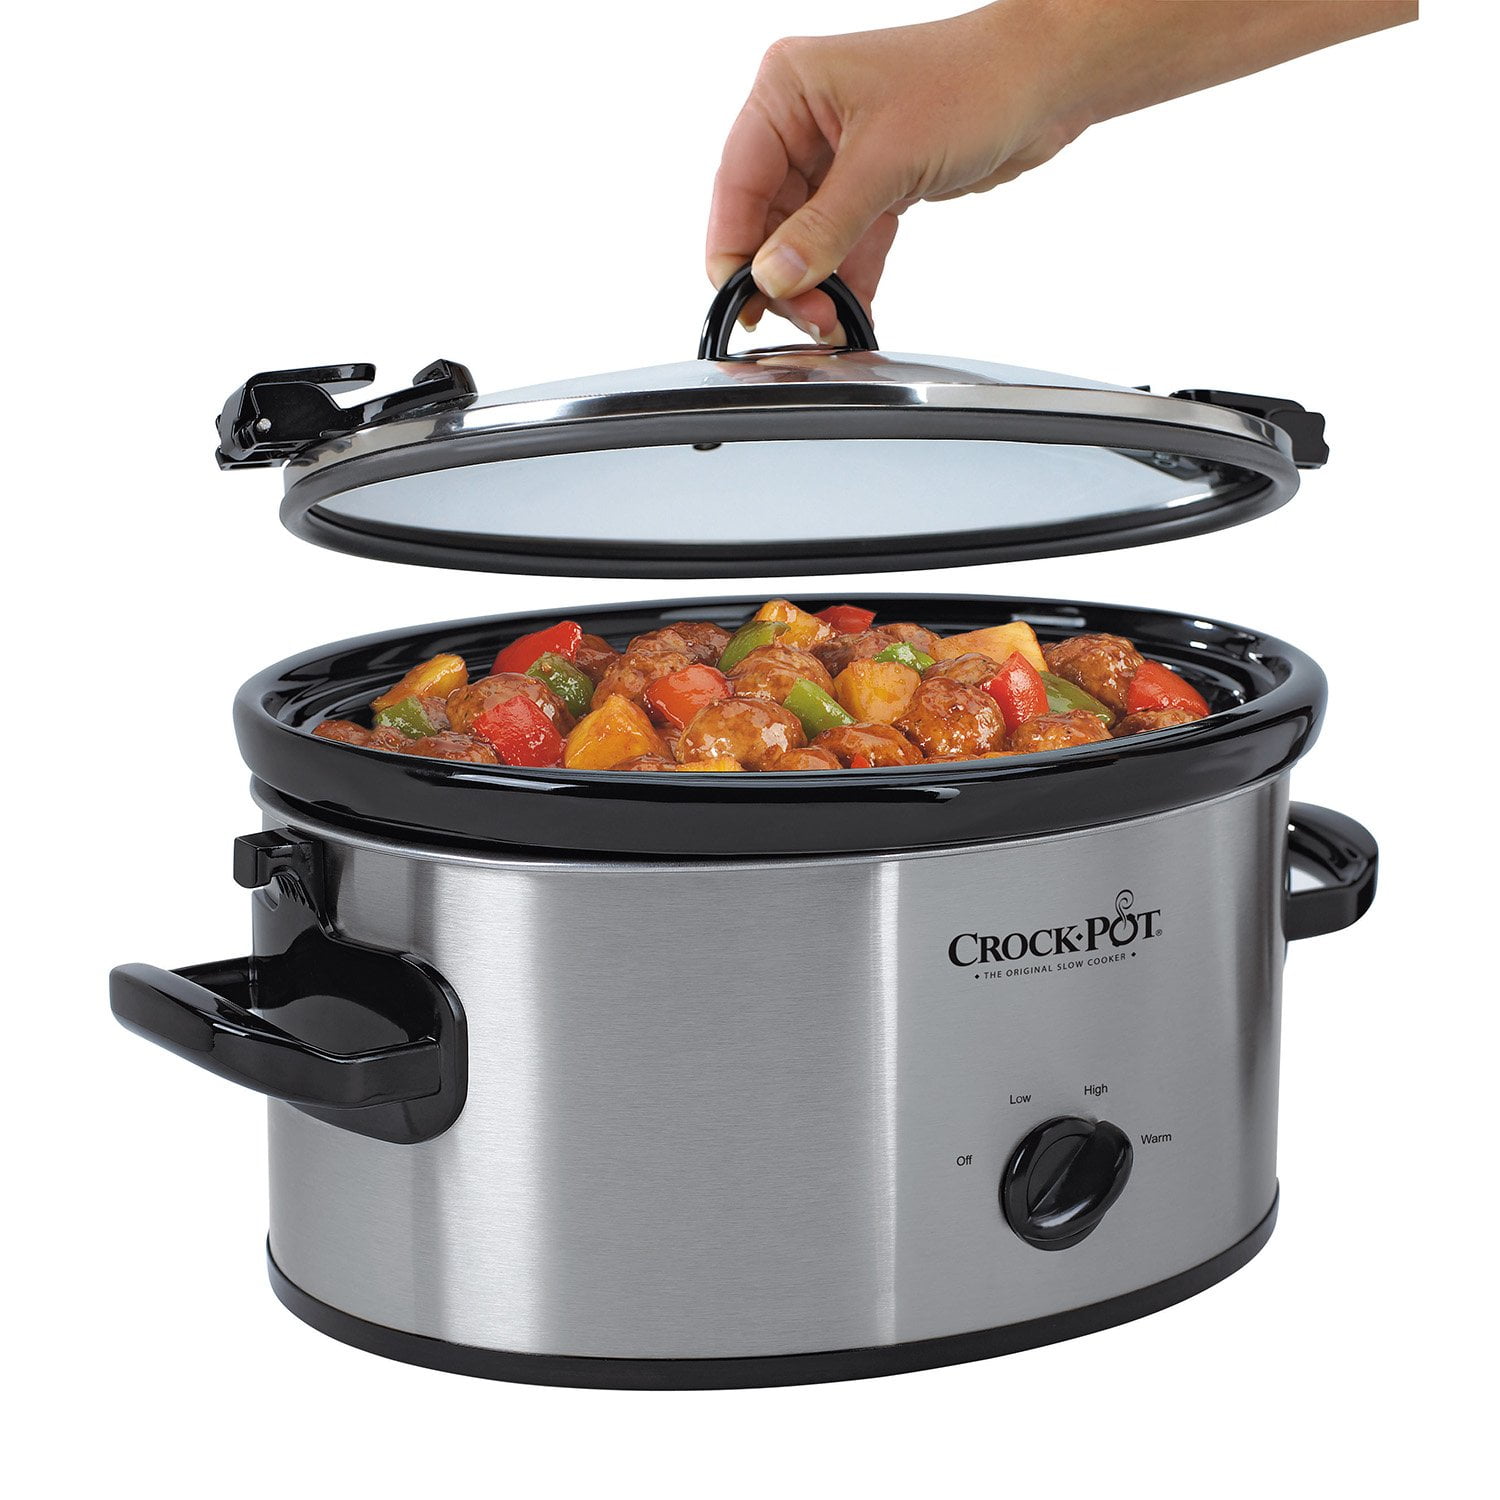 Crock-Pot Portable 7 Quart Slow Cooker with Locking Lid and Auto